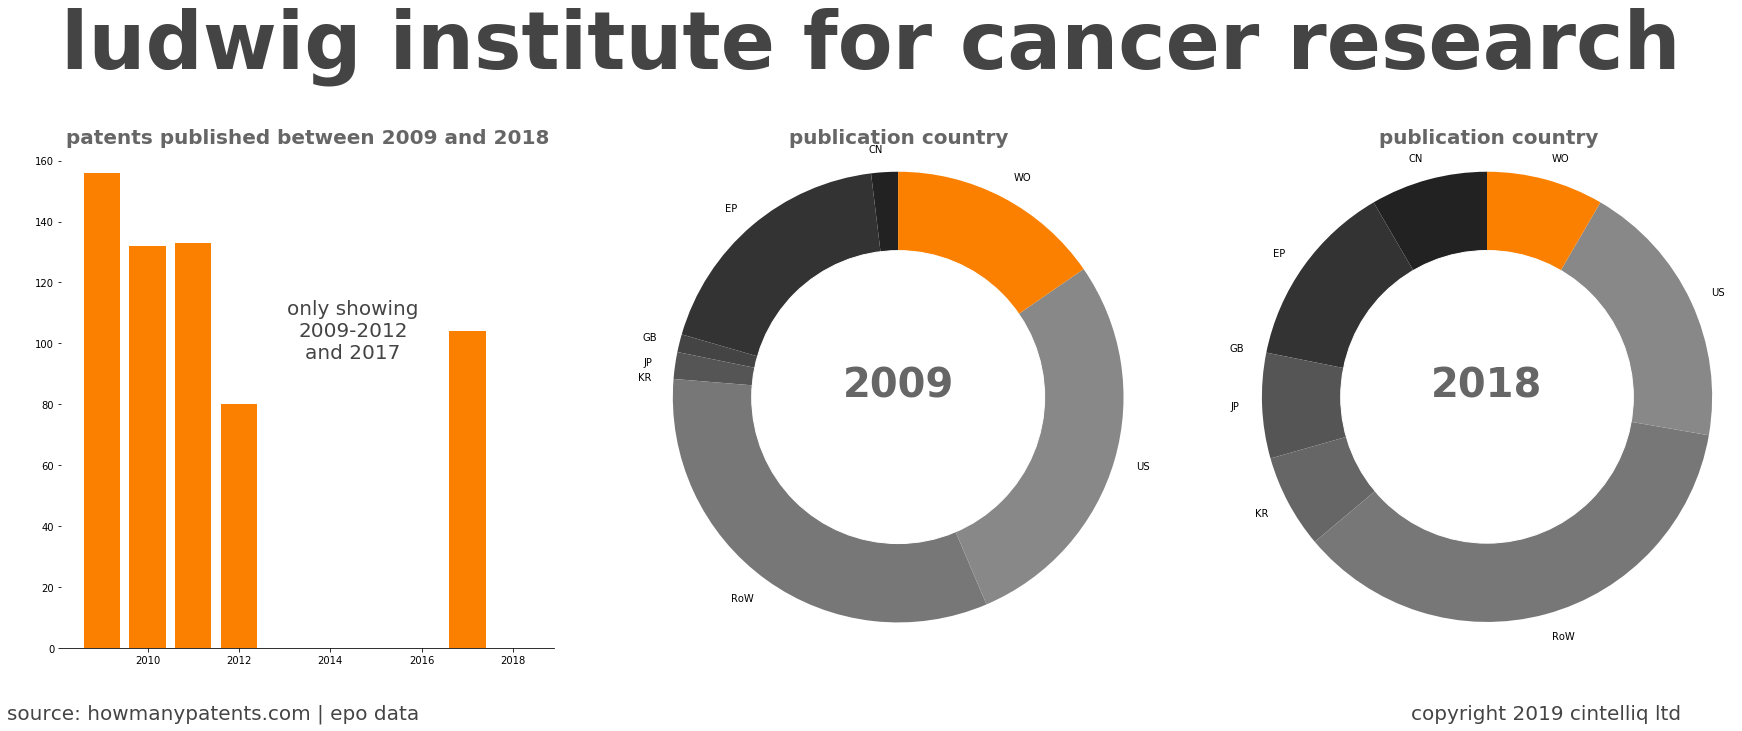 summary of patents for Ludwig Institute For Cancer Research